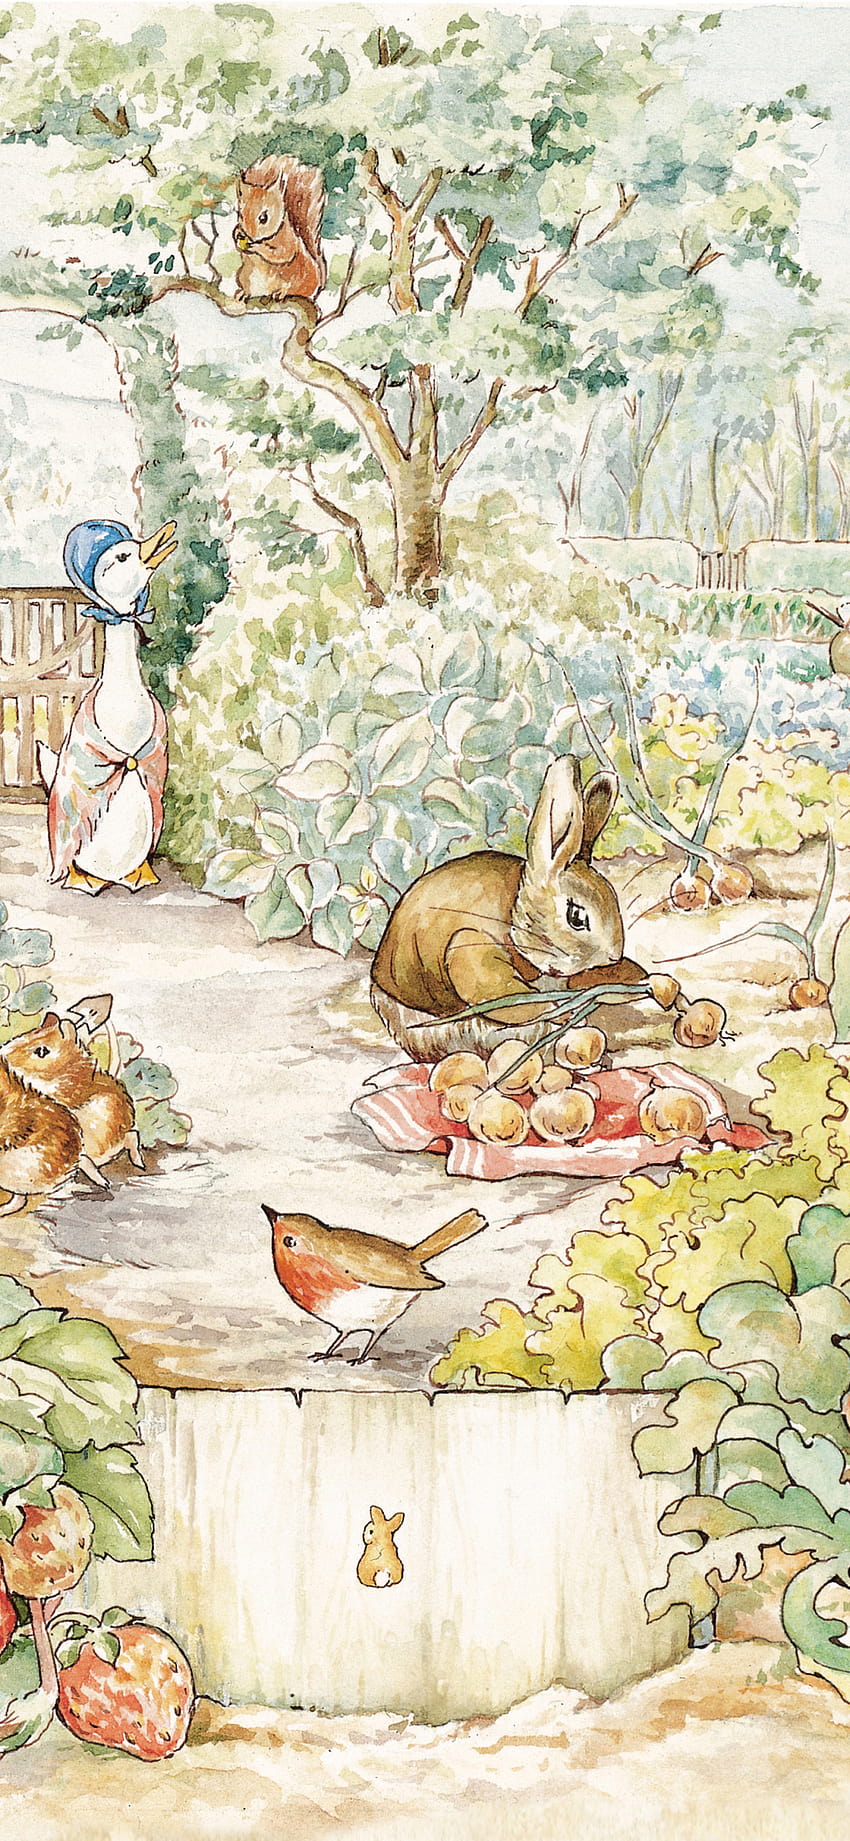 Poster Peter Rabbit Wallpaper Photo Large Print 36x24 Inches Banner  Media Multicolor Fine Art Print  Movies posters in India  Buy art  film design movie music nature and educational paintingswallpapers at